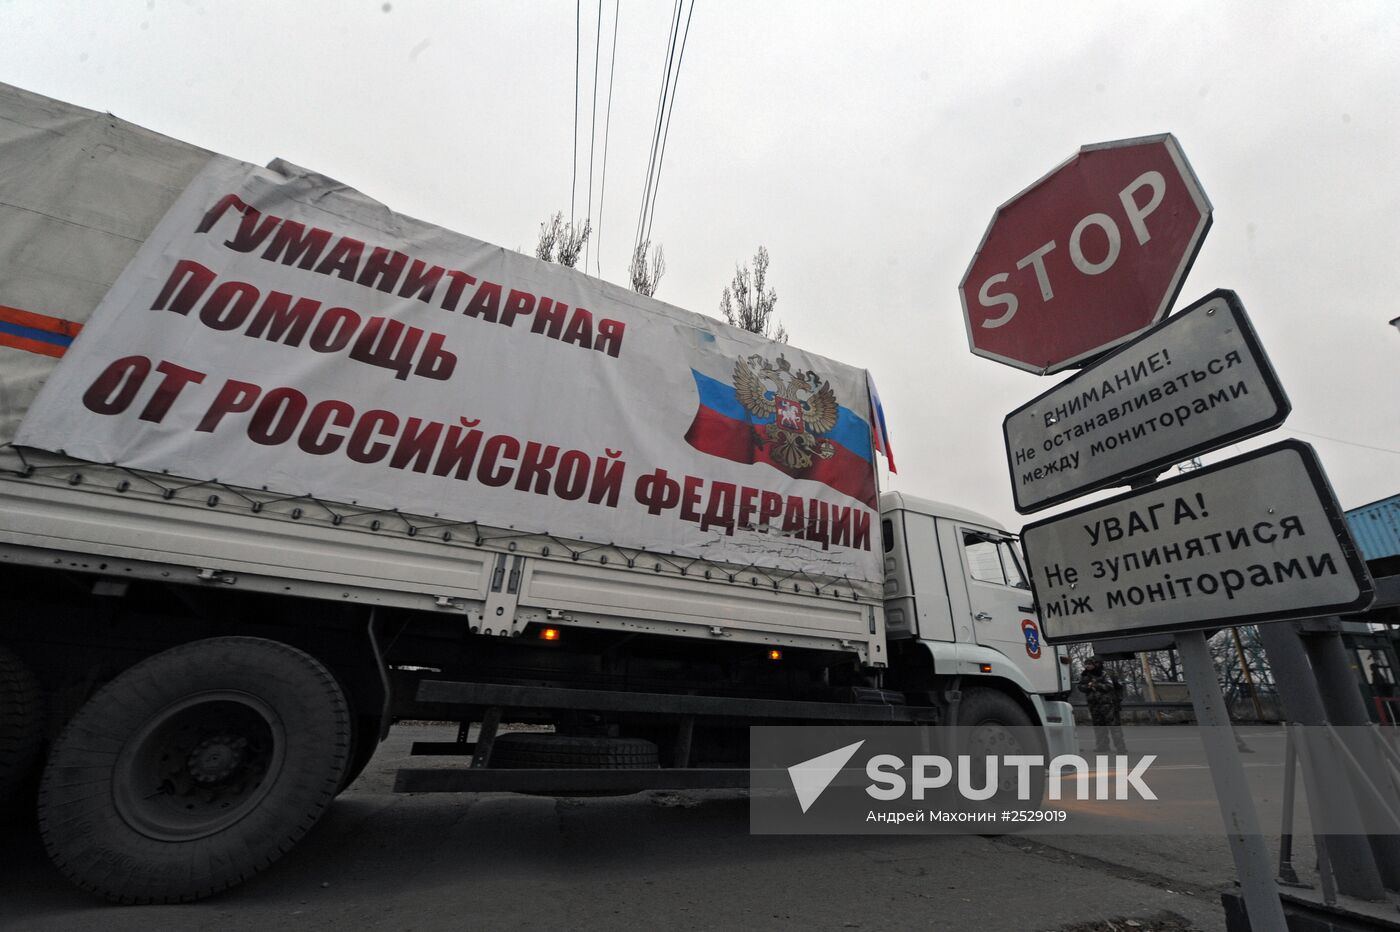 Seventh Russian humanitarian relief convoy arrives in Donbas